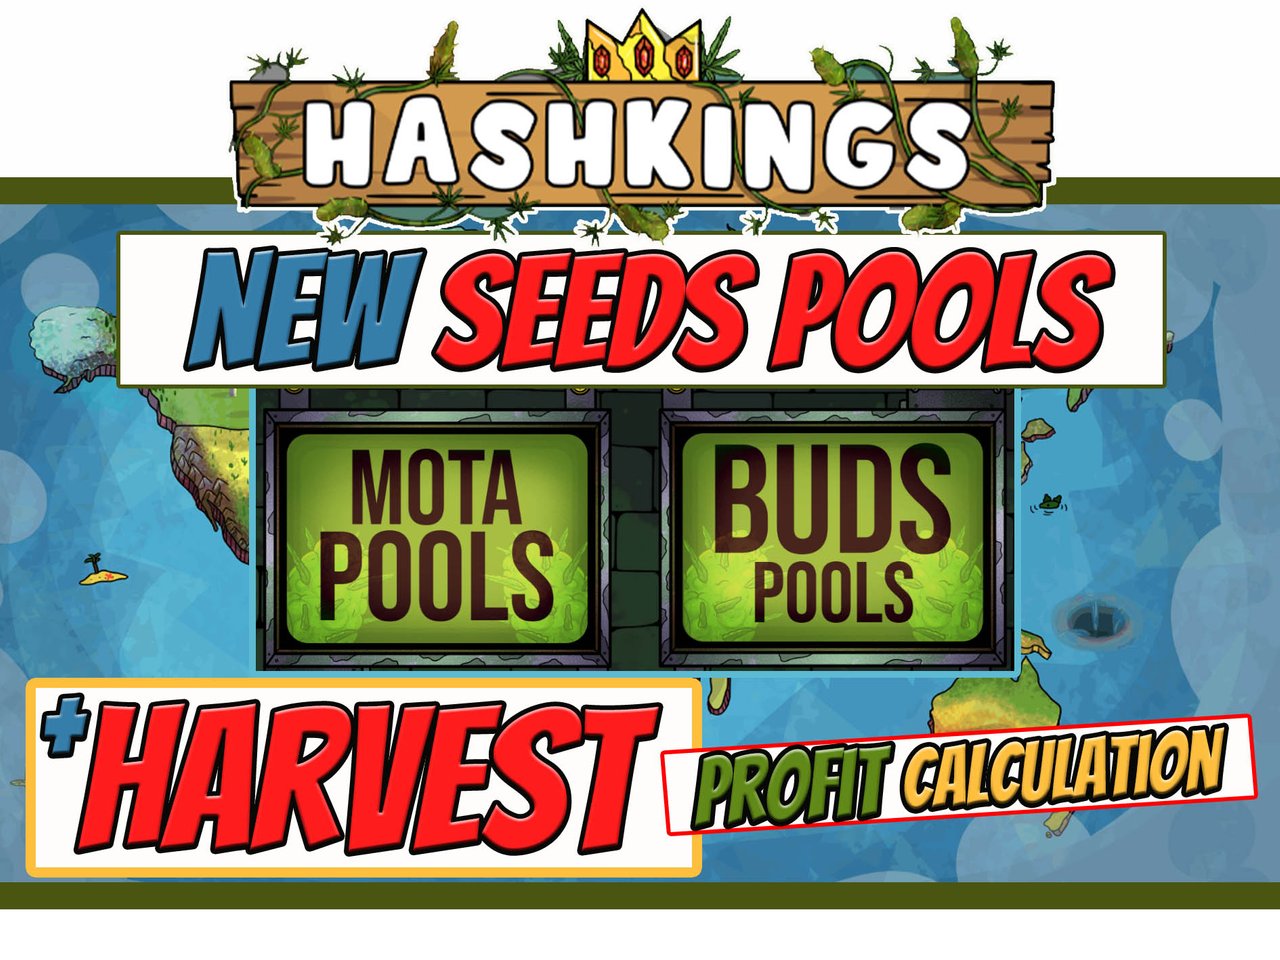 Hashkings: New Seeds Pools and My Harvest Profit Calculation (ENG/ITA)